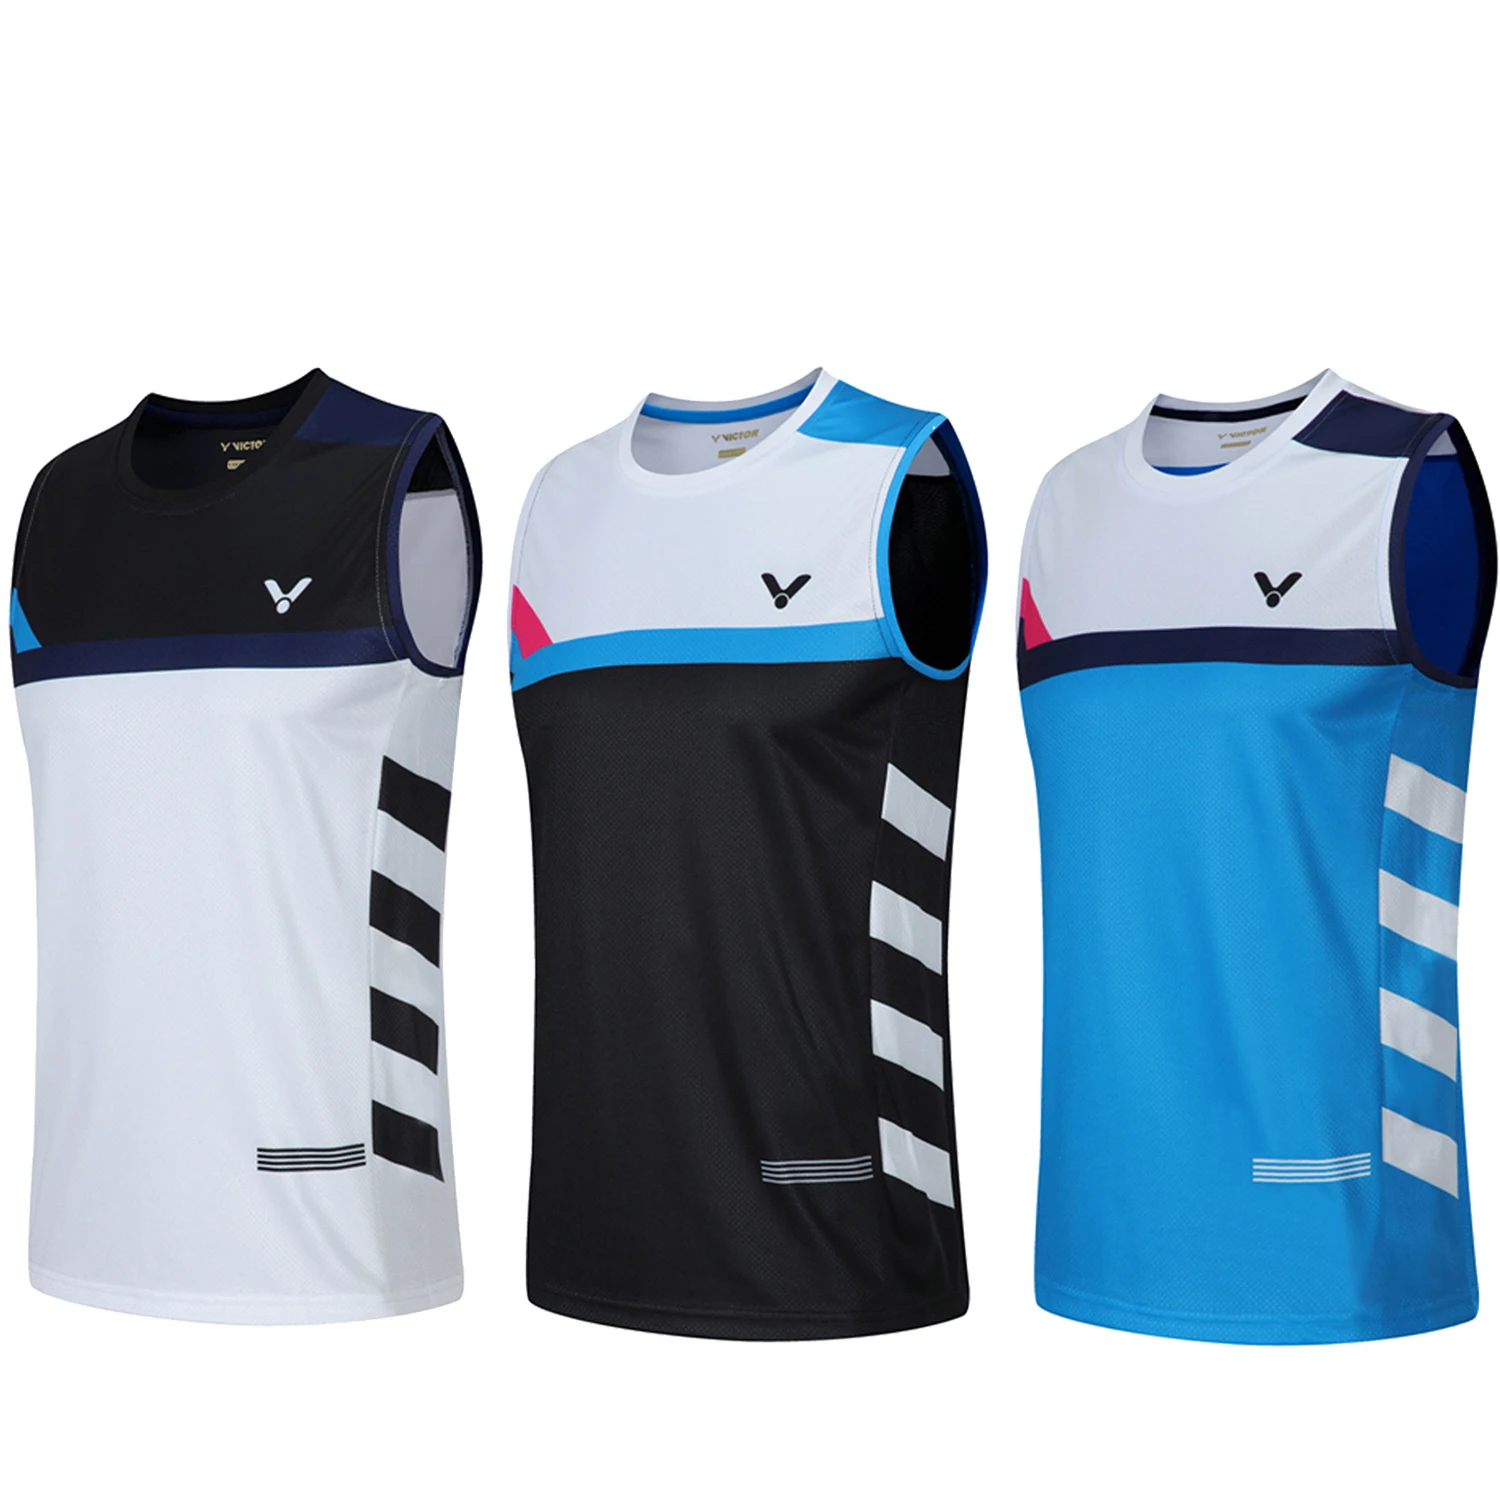 

Sleeveless Badminton Wear Sleeveless Men‘s Quick-drying Breathable Competition Vest Sports Training Clothes Jacket Polyester